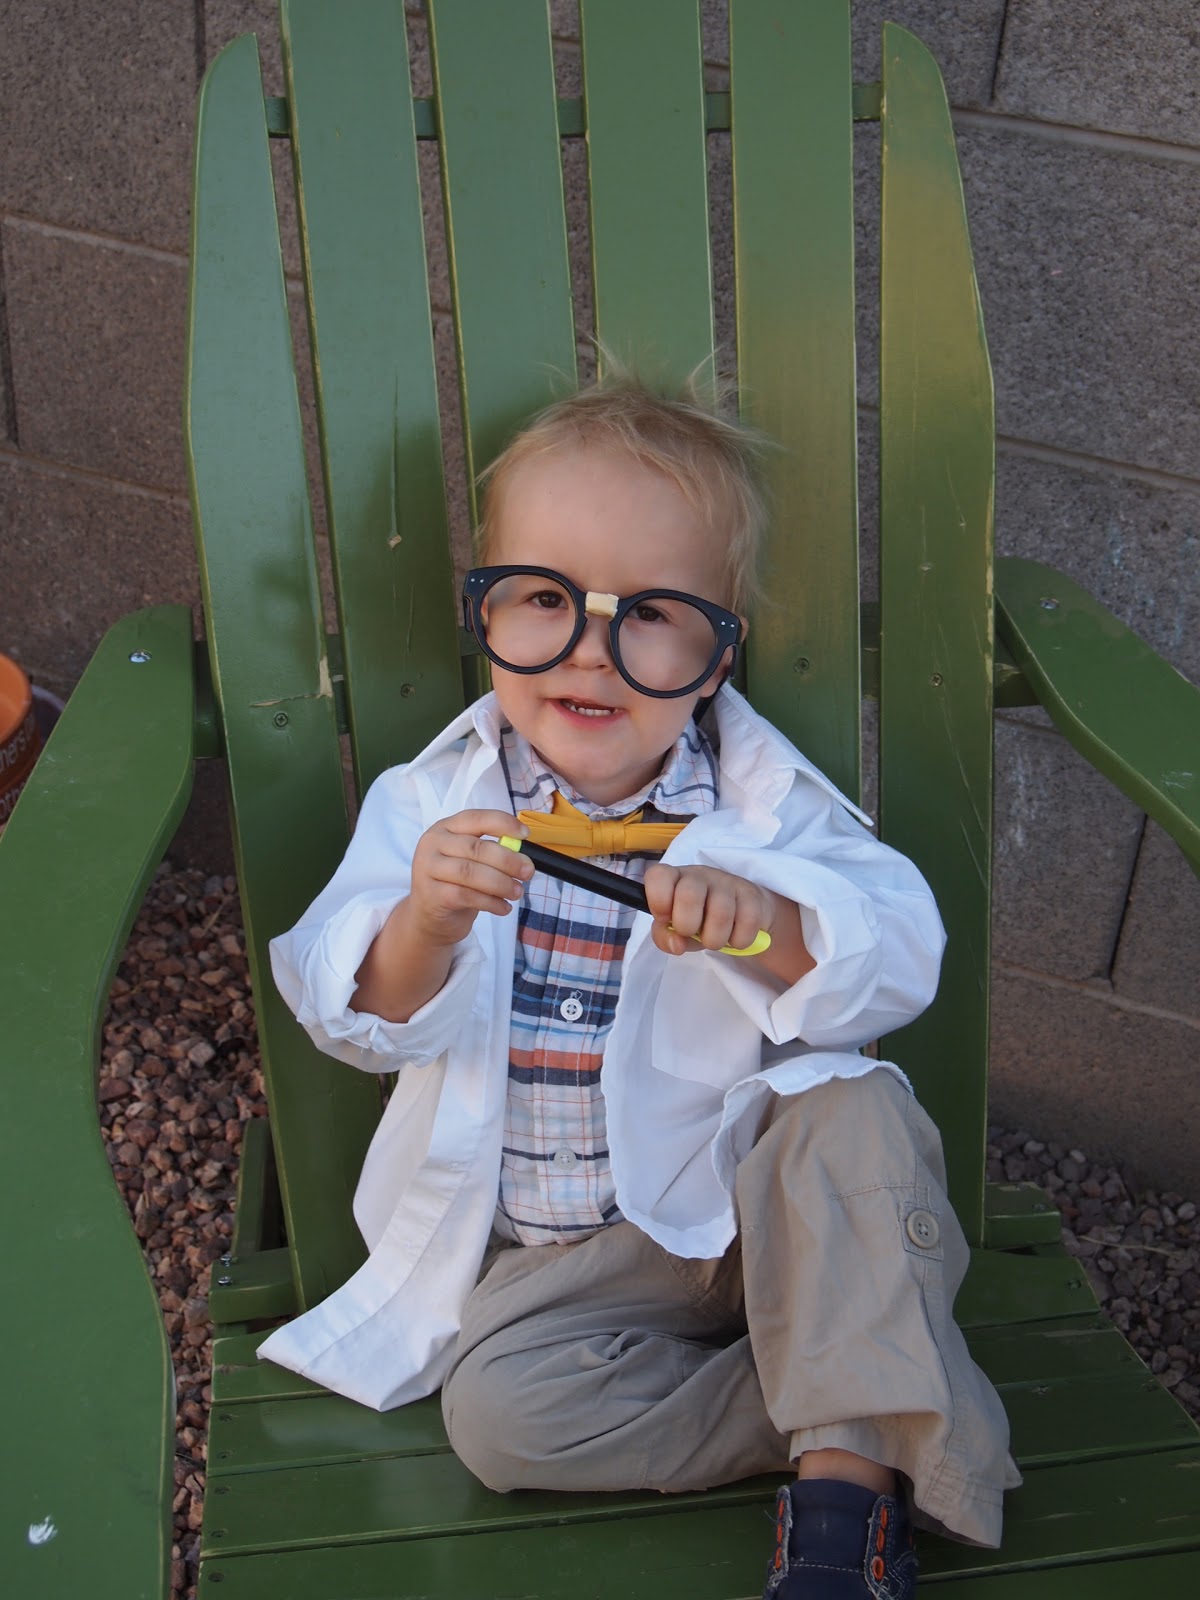 Cracked Up Kitchen: Mad Scientist and Other Inexpensive Halloween Costumes